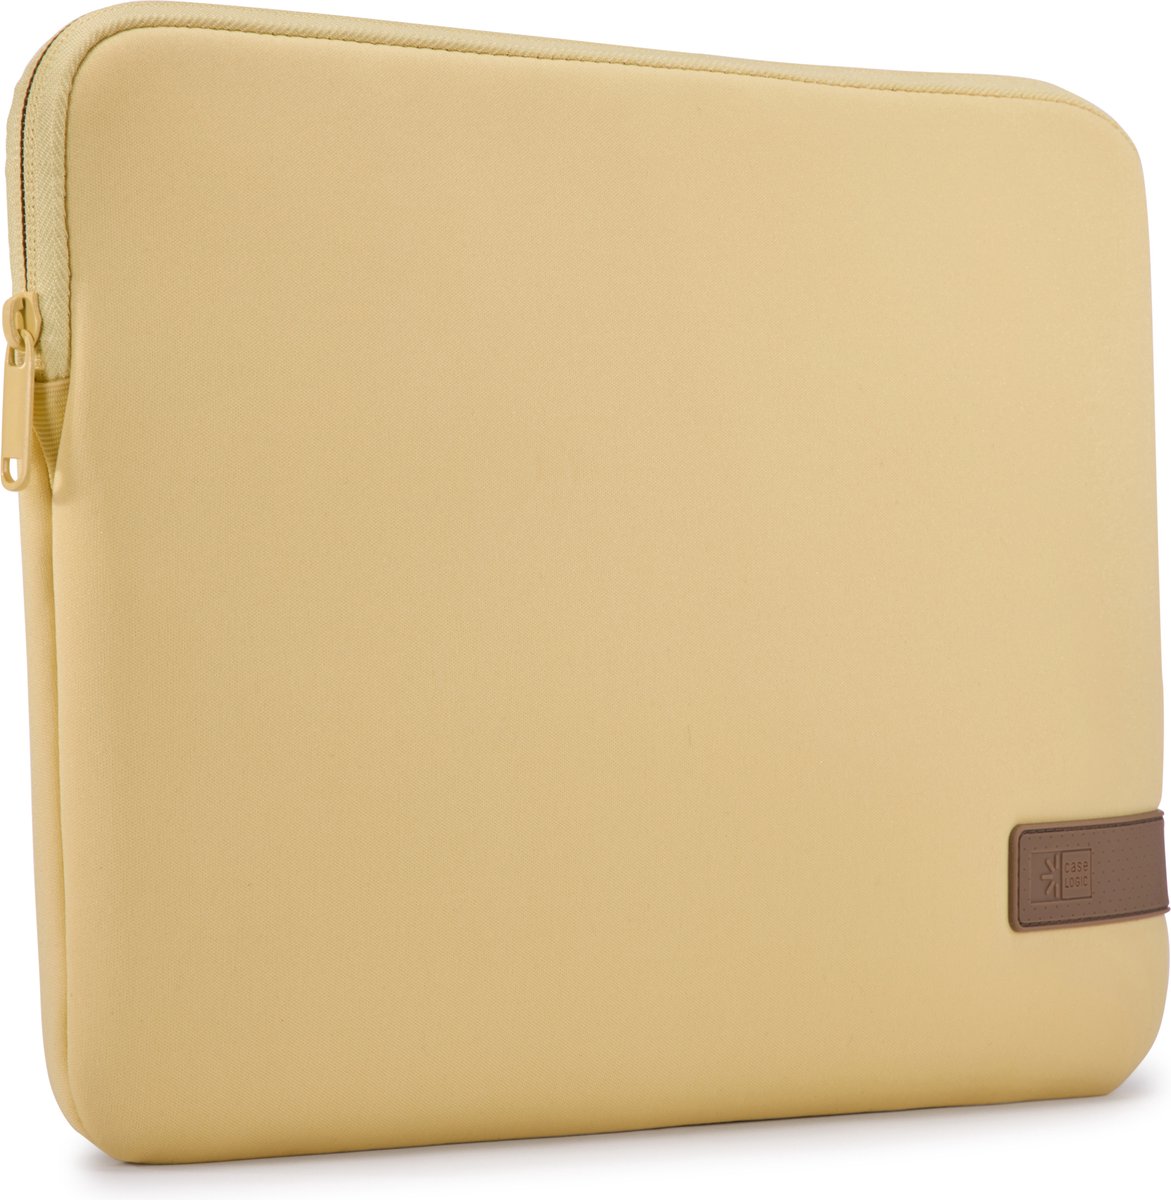 Case Logic REFPC113 - Laptophoes/ Sleeve - 13.3 inch - Yonder Yellow